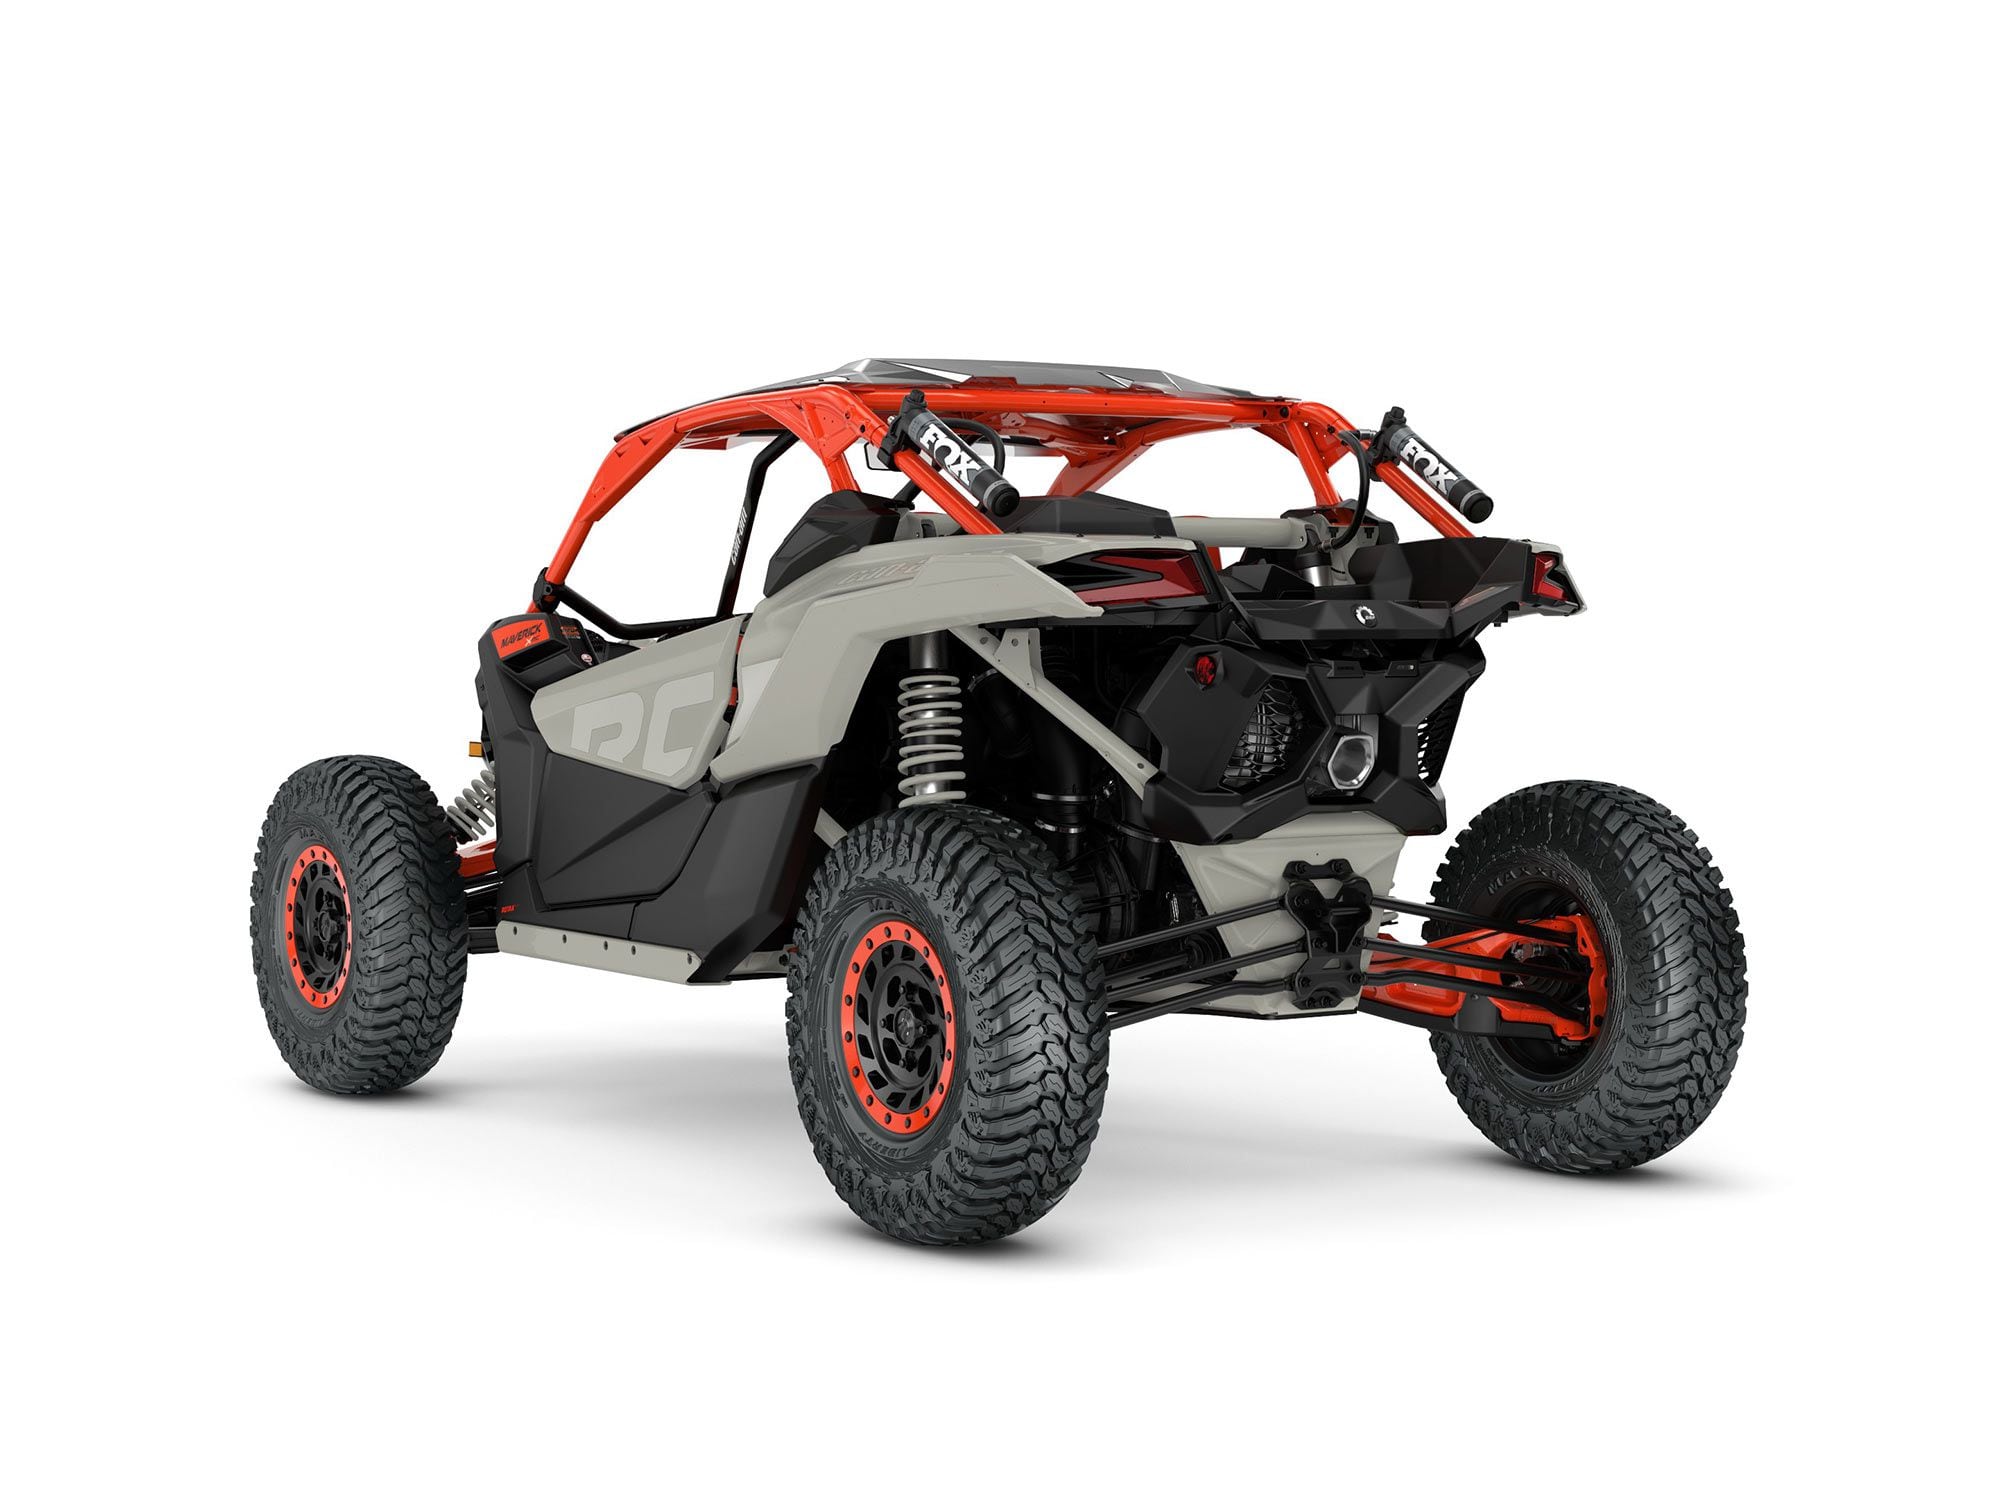 2022 Can-Am Maverick X3 X RC Turbo RR 72 rear view in Chalk Gray and Magma Red color.